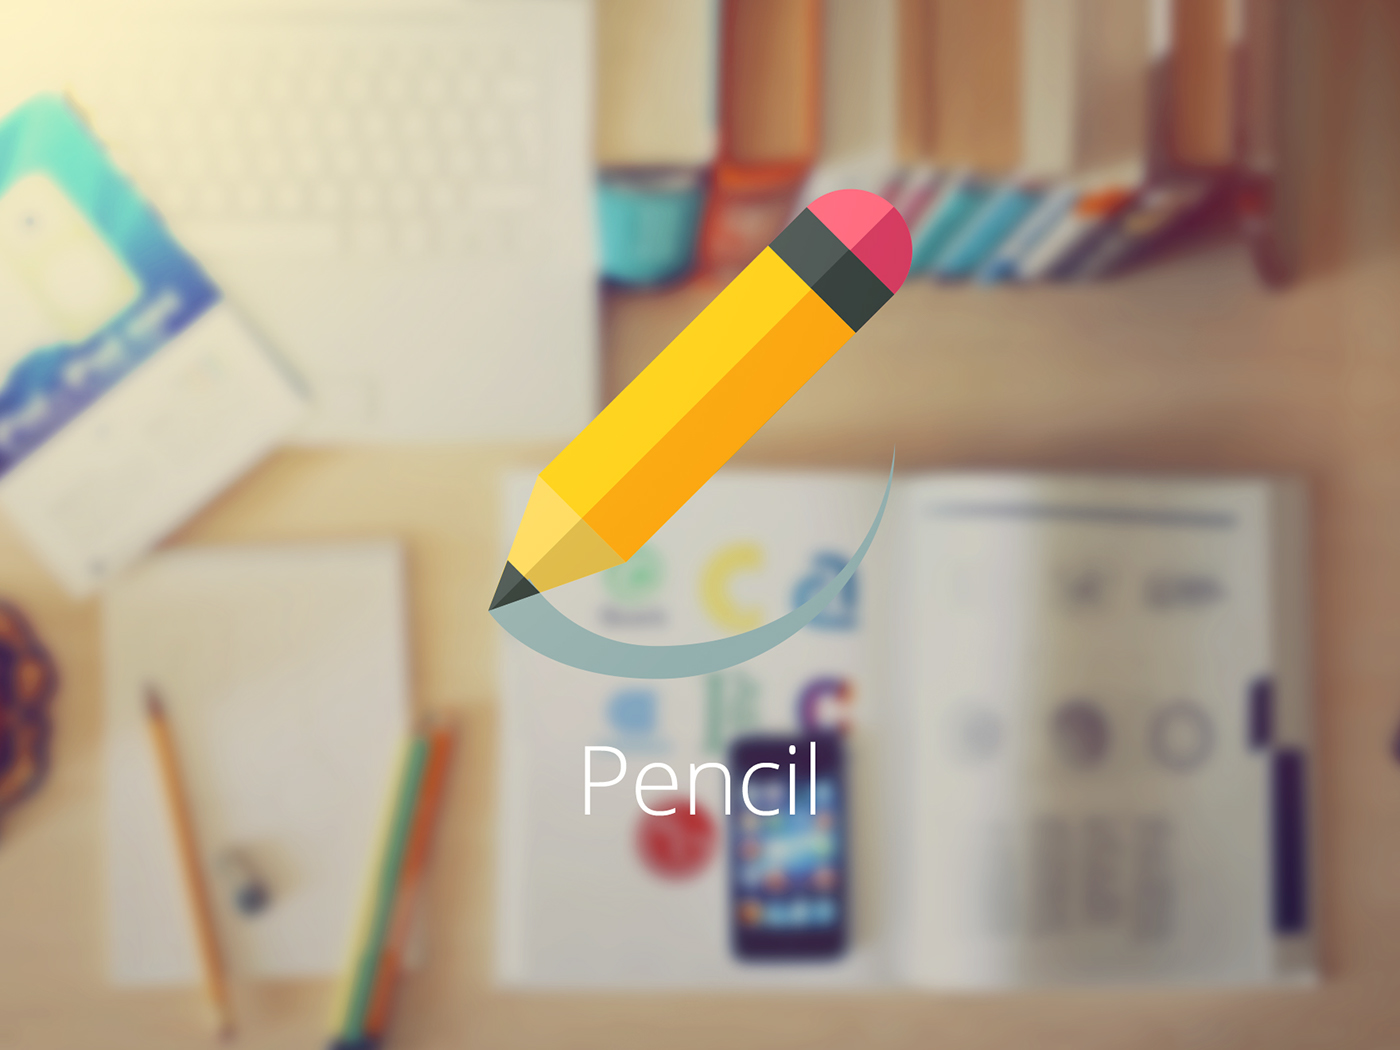 icons deisgn Born mailbox clock rocket pencil flat flat icons simple simple icons trend red yellow blue